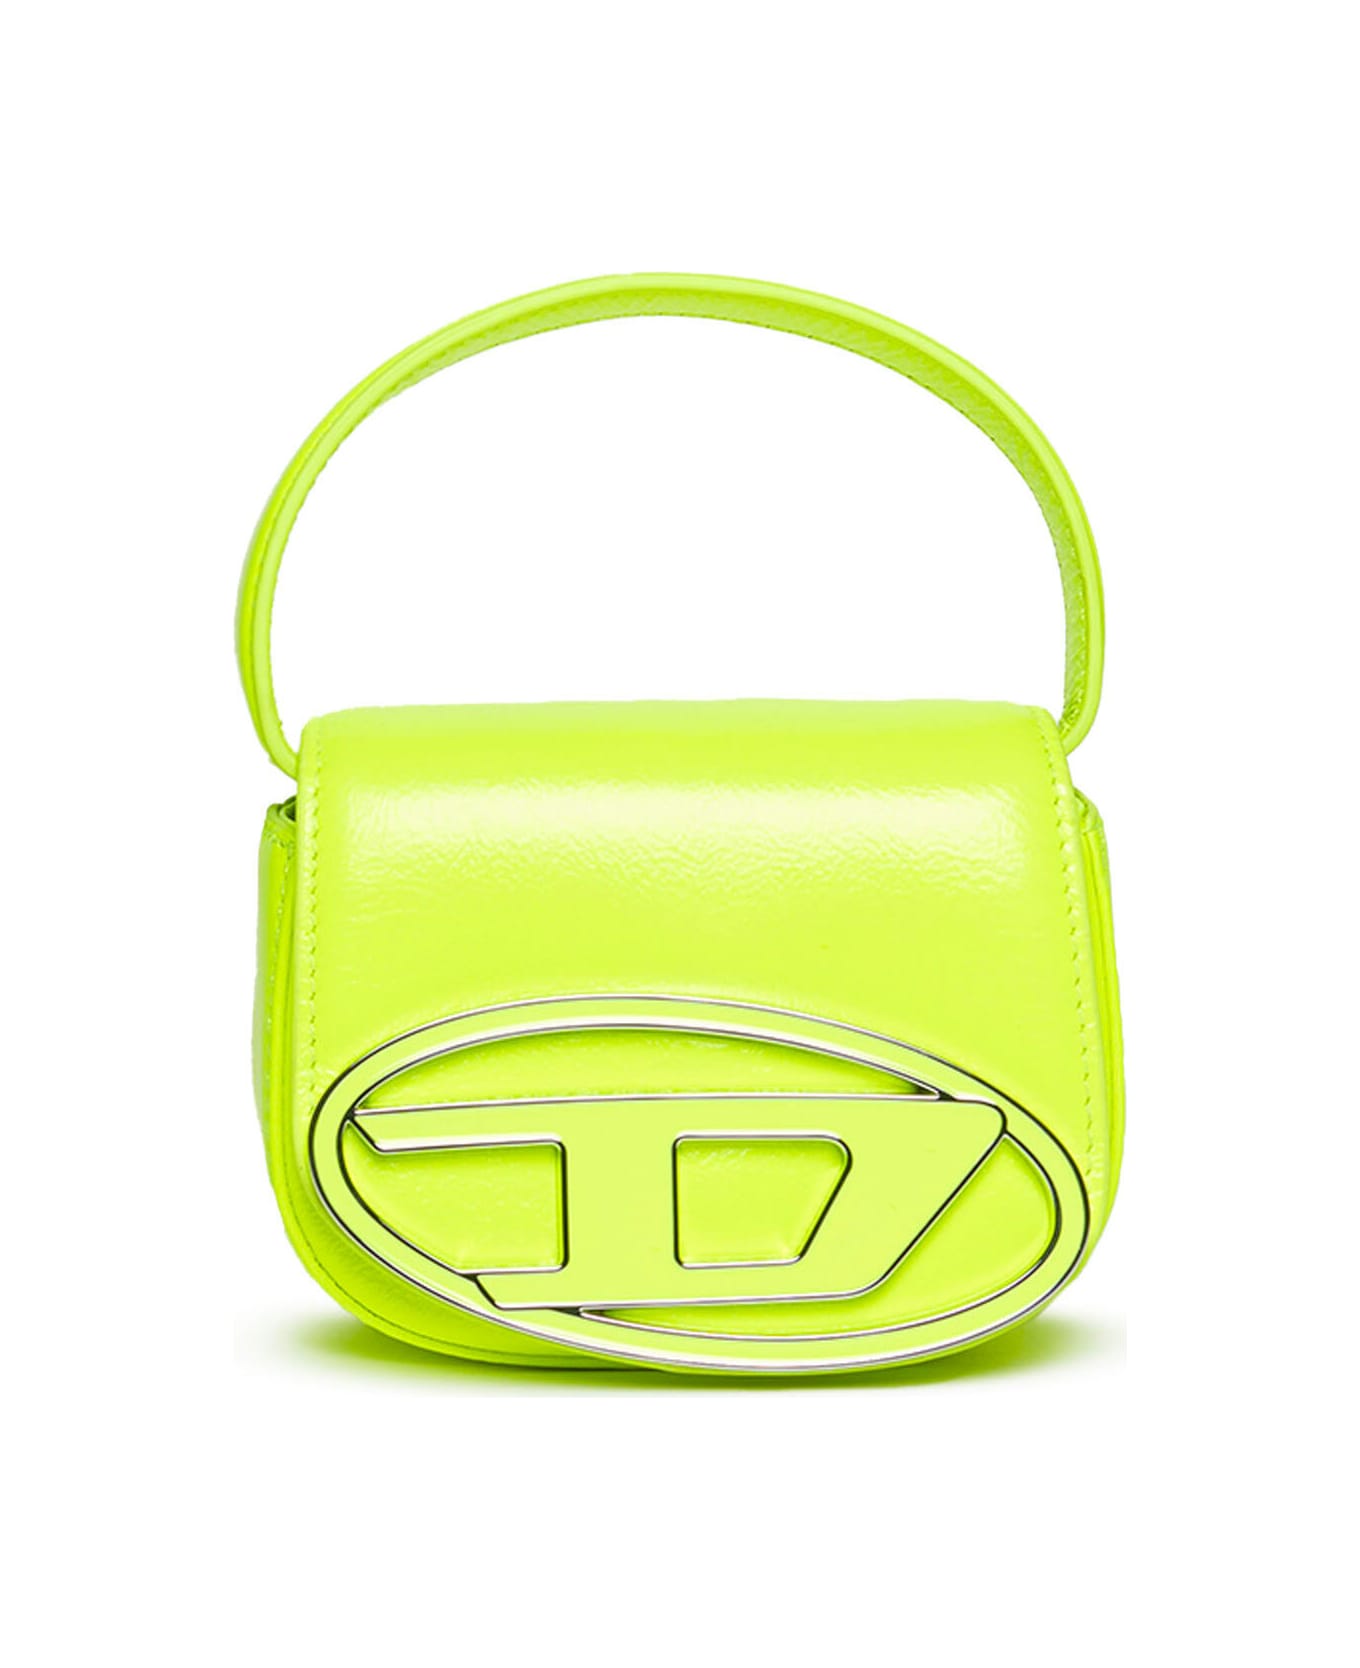 Diesel 1dr Xs Bags Diesel 1dr Xs Bag In Fluo Imitation Leather - Yellow